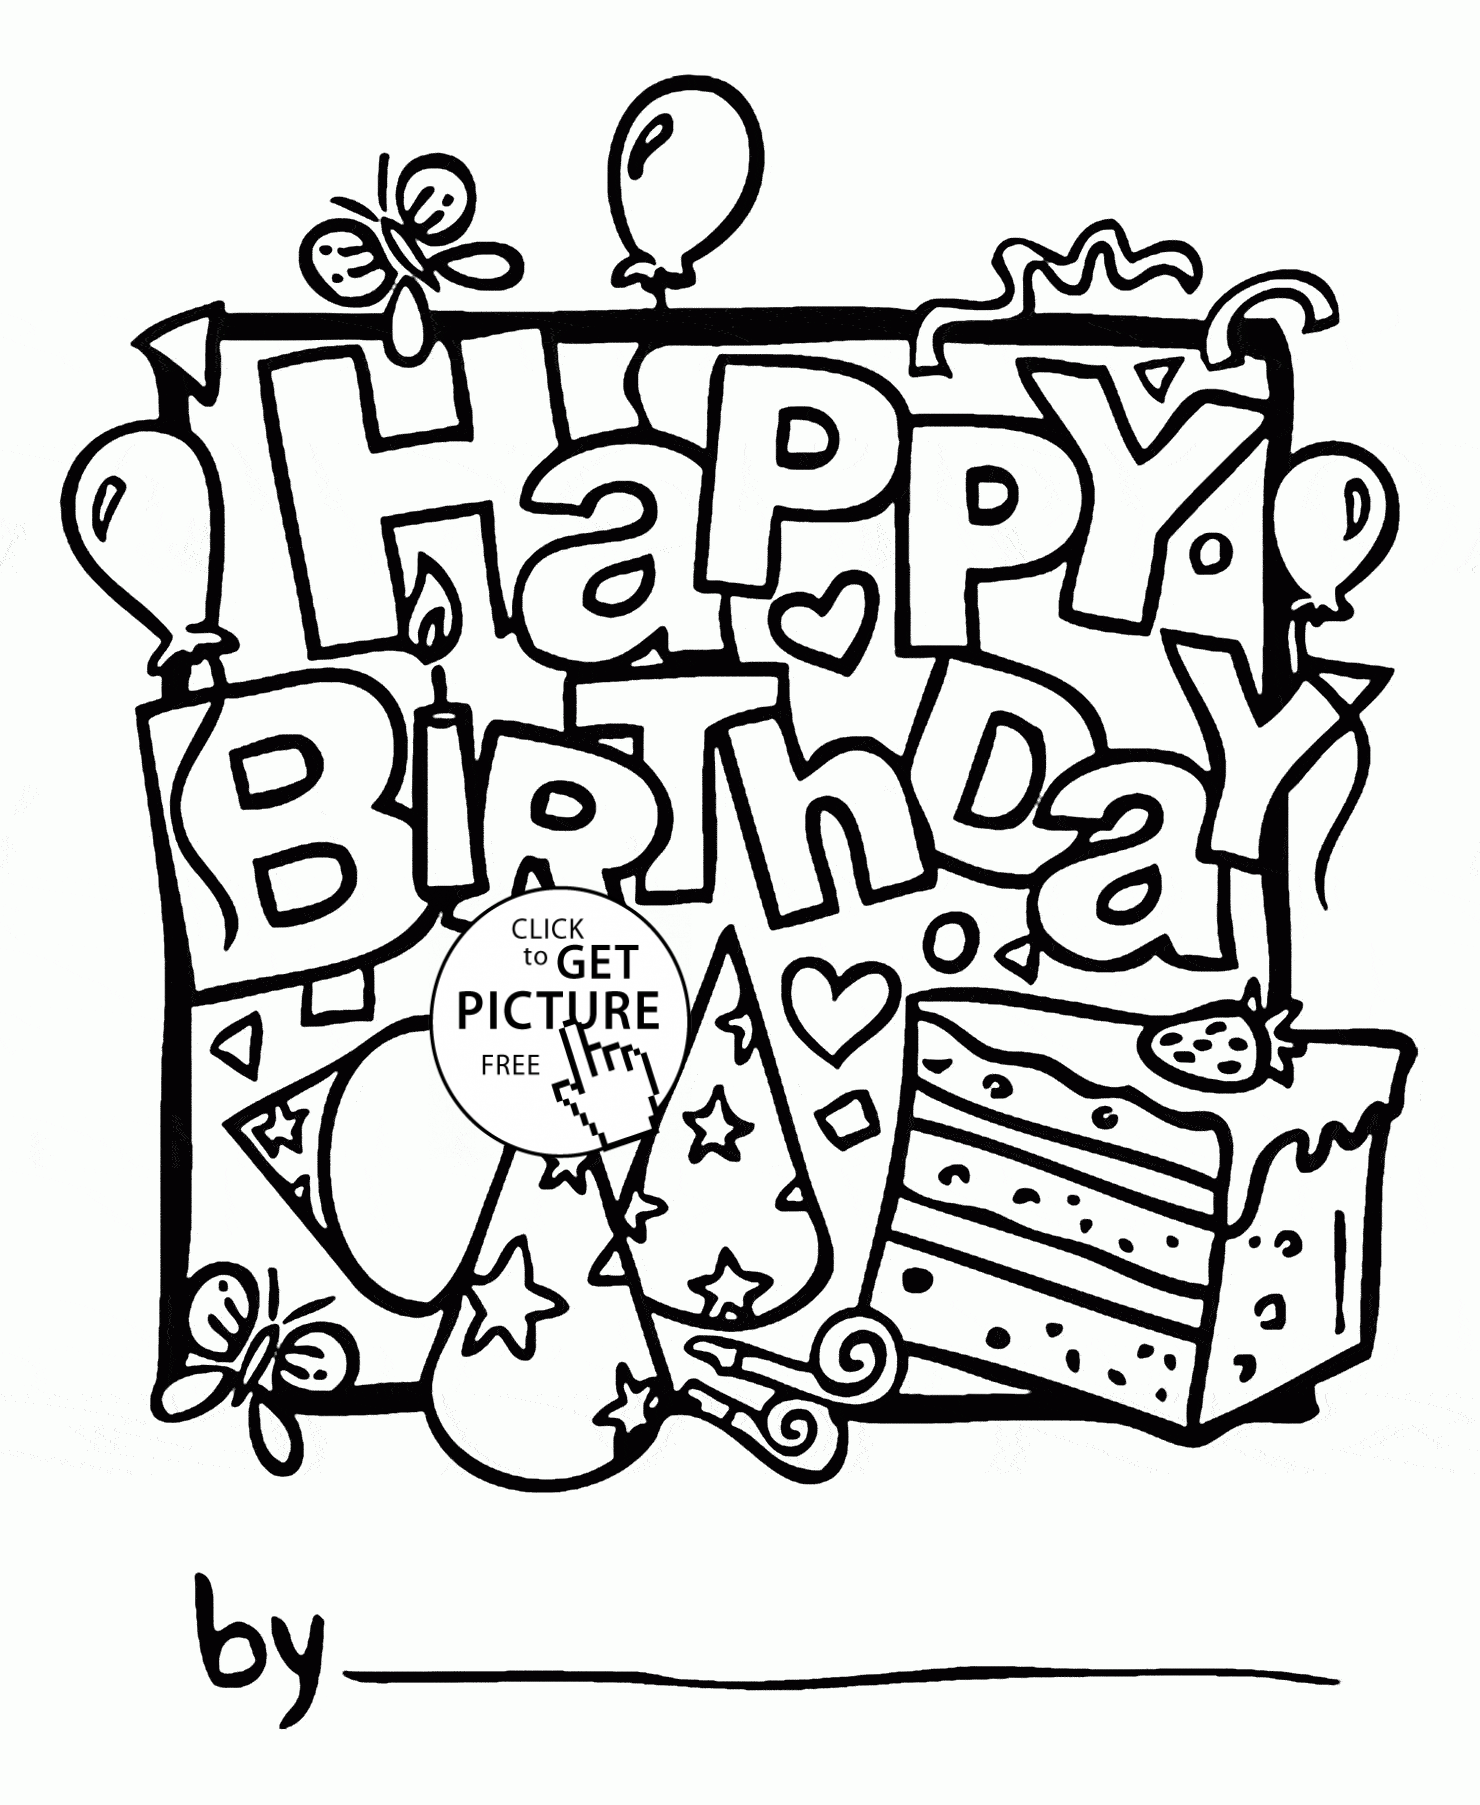 Free Coloring Pages Birthday Card For Boy Download Free Coloring Pages 